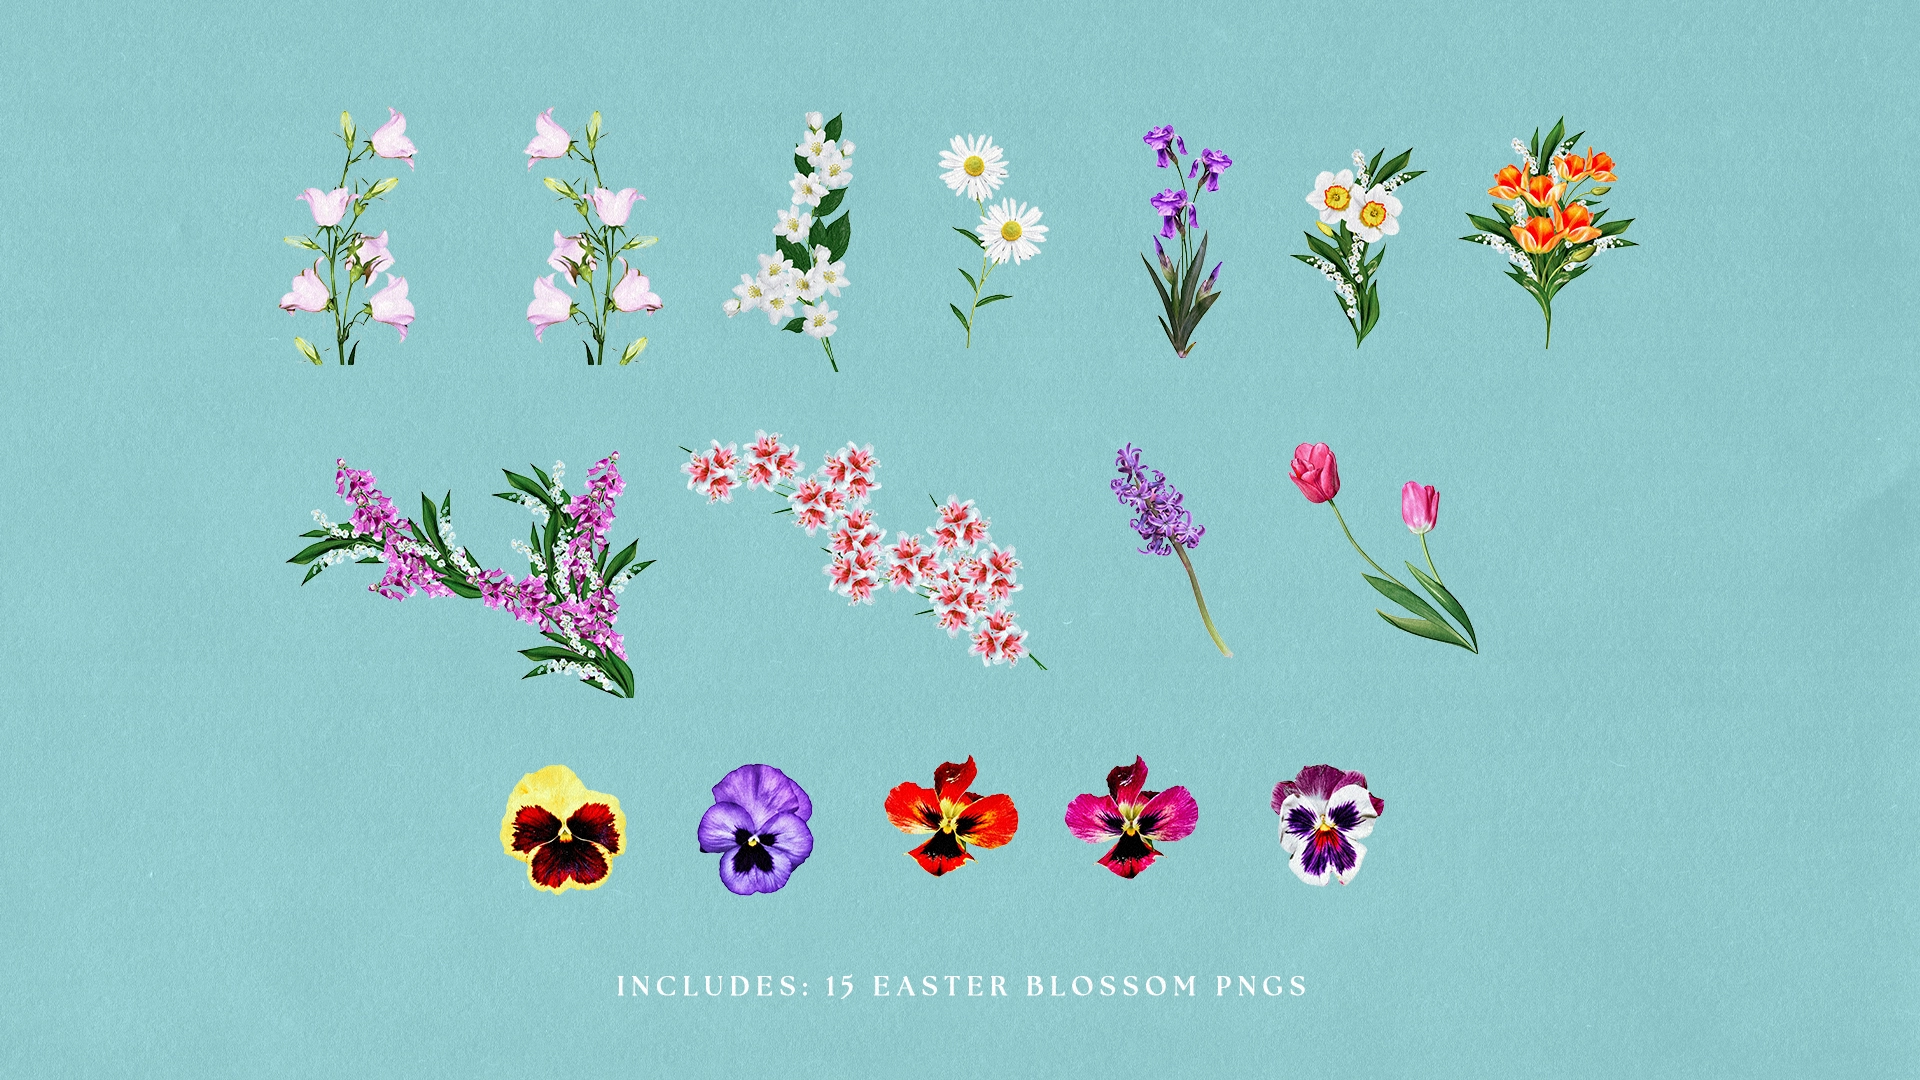 This Design Resource For Church Media Is A Vibrant Collection Of Easter-Themed Graphics, Featuring 22 Png Elements Of Meticulously Detailed Easter Blossoms And Foliage. Perfect For Crafting A Springtime Narrative, These Elements Can Be Easily Incorporated Into Custom Designs, Inviting A Touch Of Nature'S Renewal And Beauty.